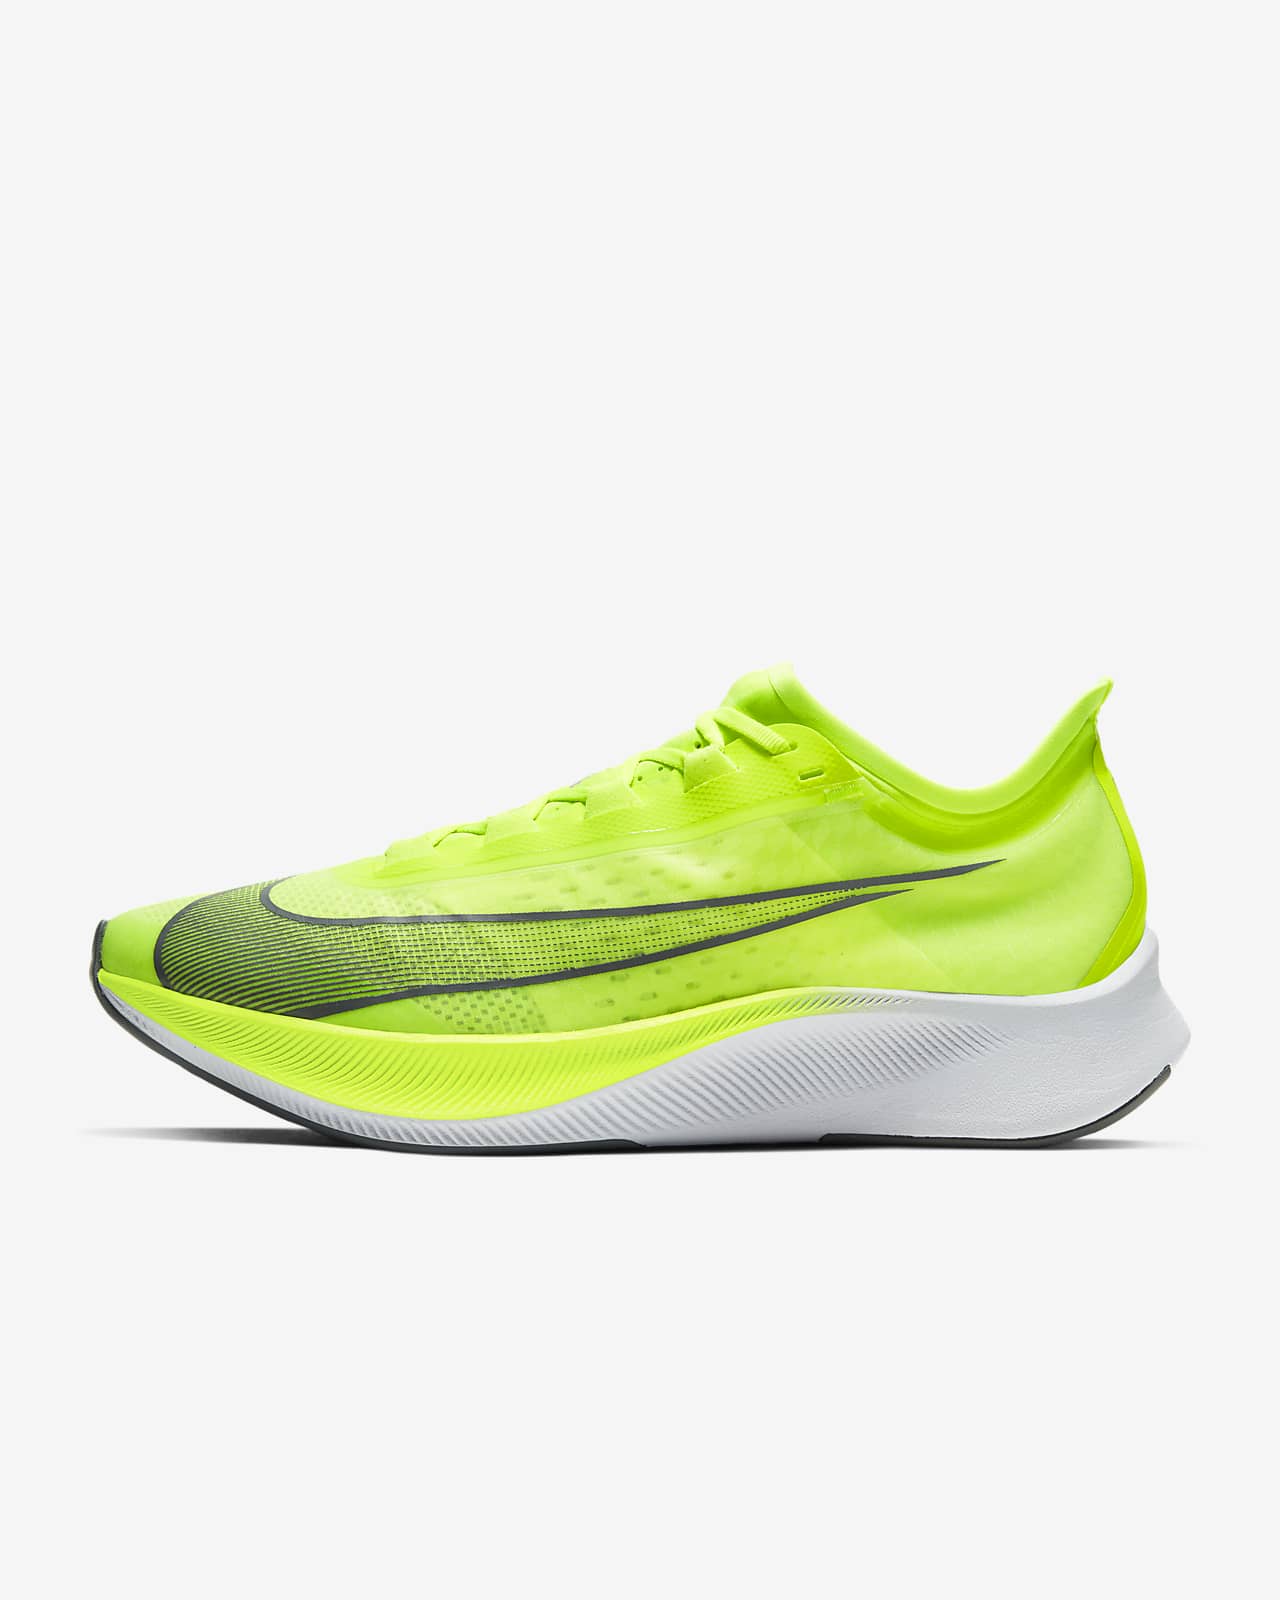 Nike Zoom Fly 3 Men's Road Racing Shoes